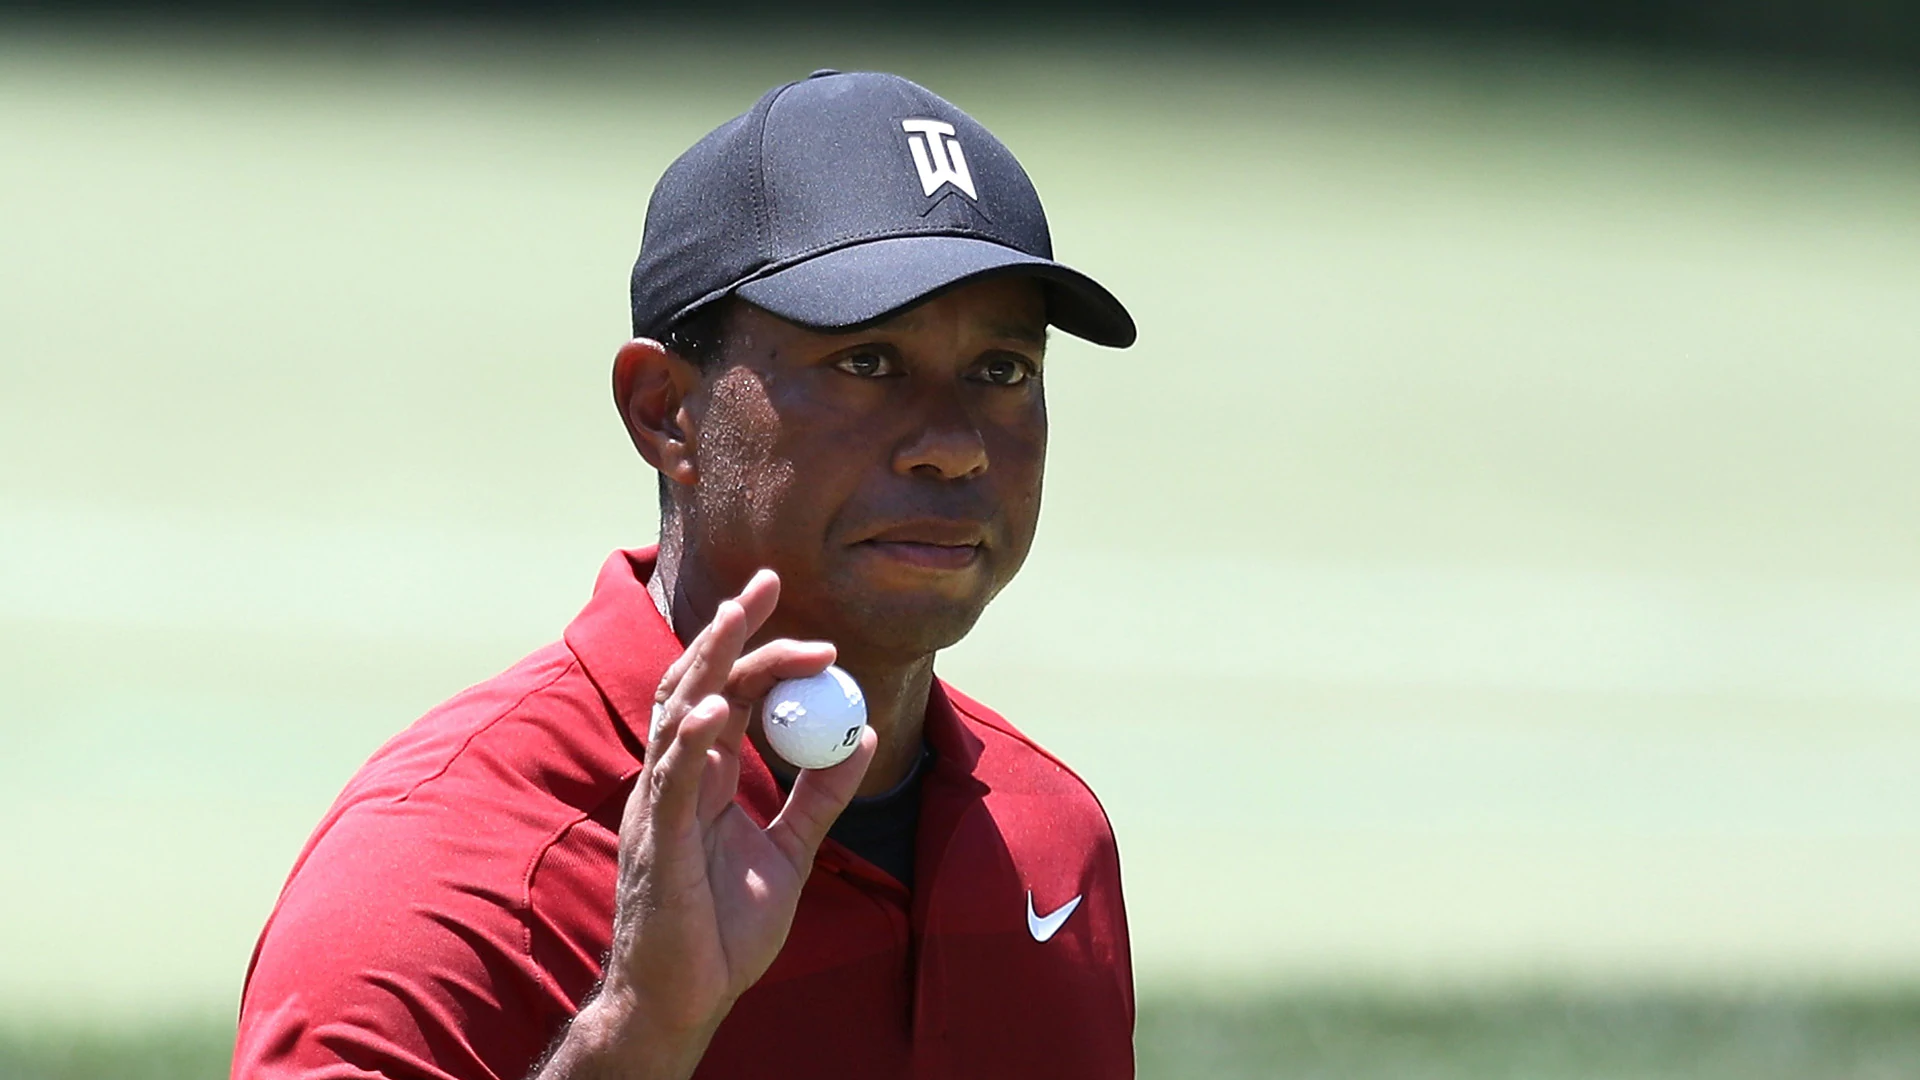 Woods moves to 67th in world after Quicken T-4